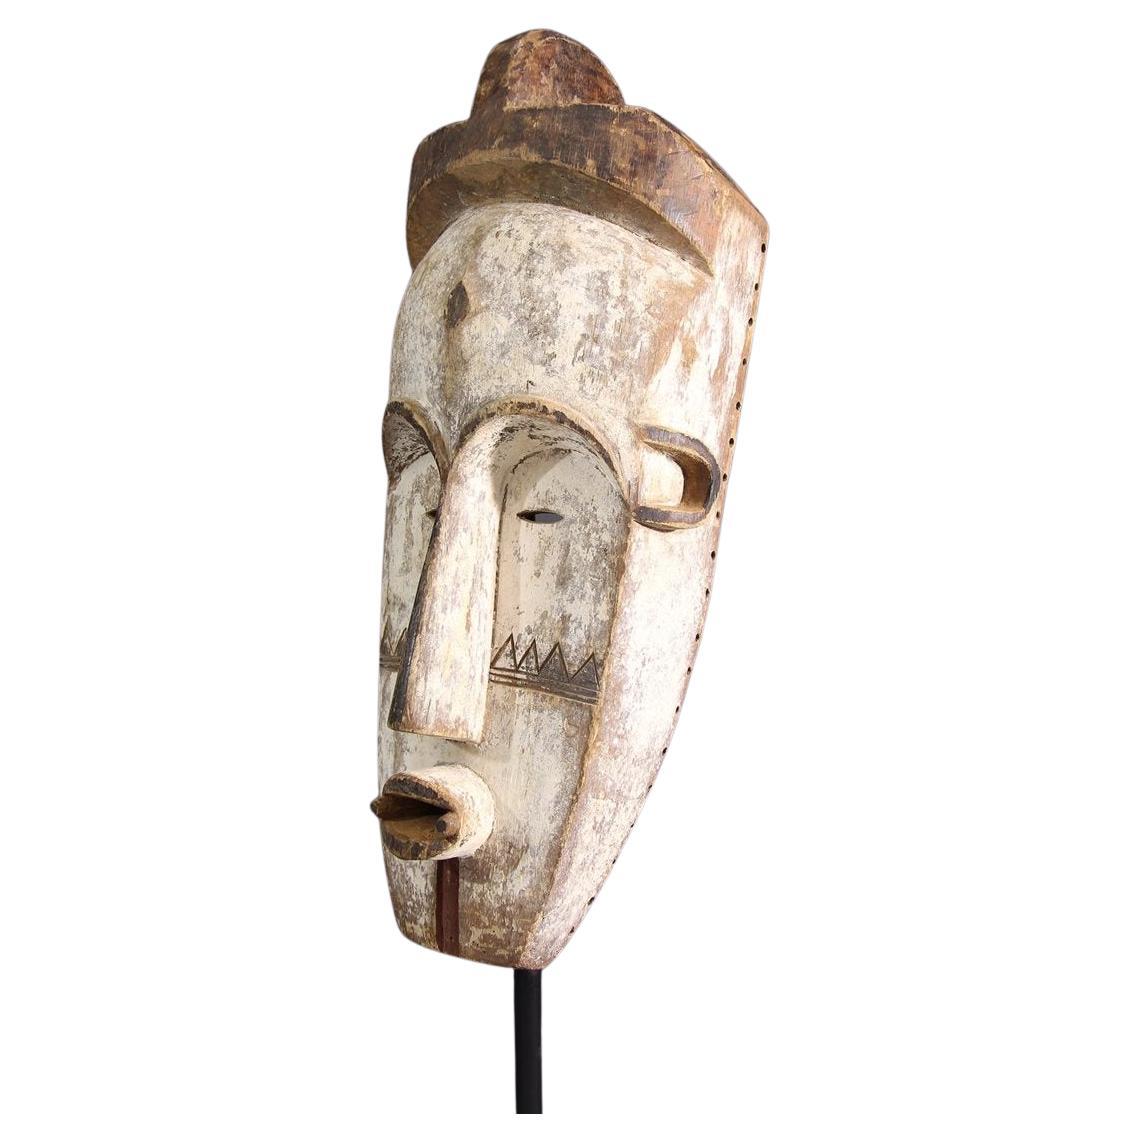 Very expressive and modern looking mask (sculptur).
The powdery colors and the reduced shape underline the beauty of the object.


Fang mask of Ngil 
In the category of great African masks, the Fang masks of Gabon, usually coated with kaolin 
(the